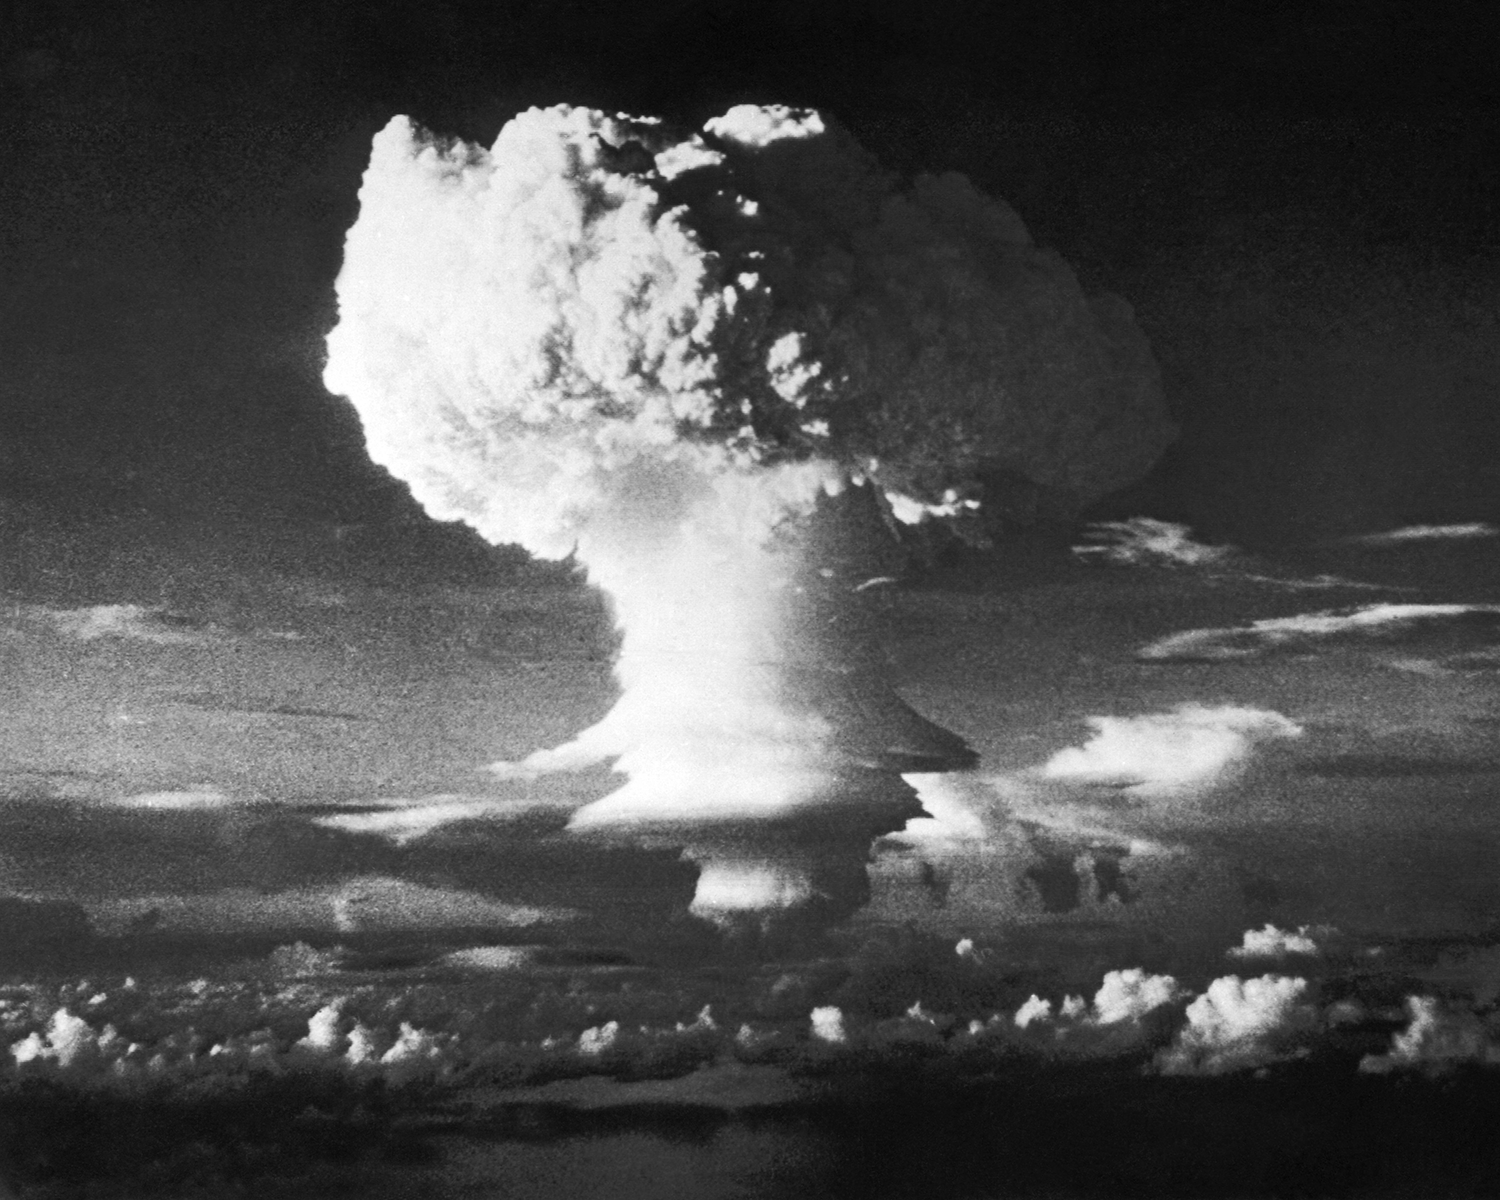 Marshall Islands, November 1 1952. The mushroom cloud formed from the first hydrogen bomb explosion